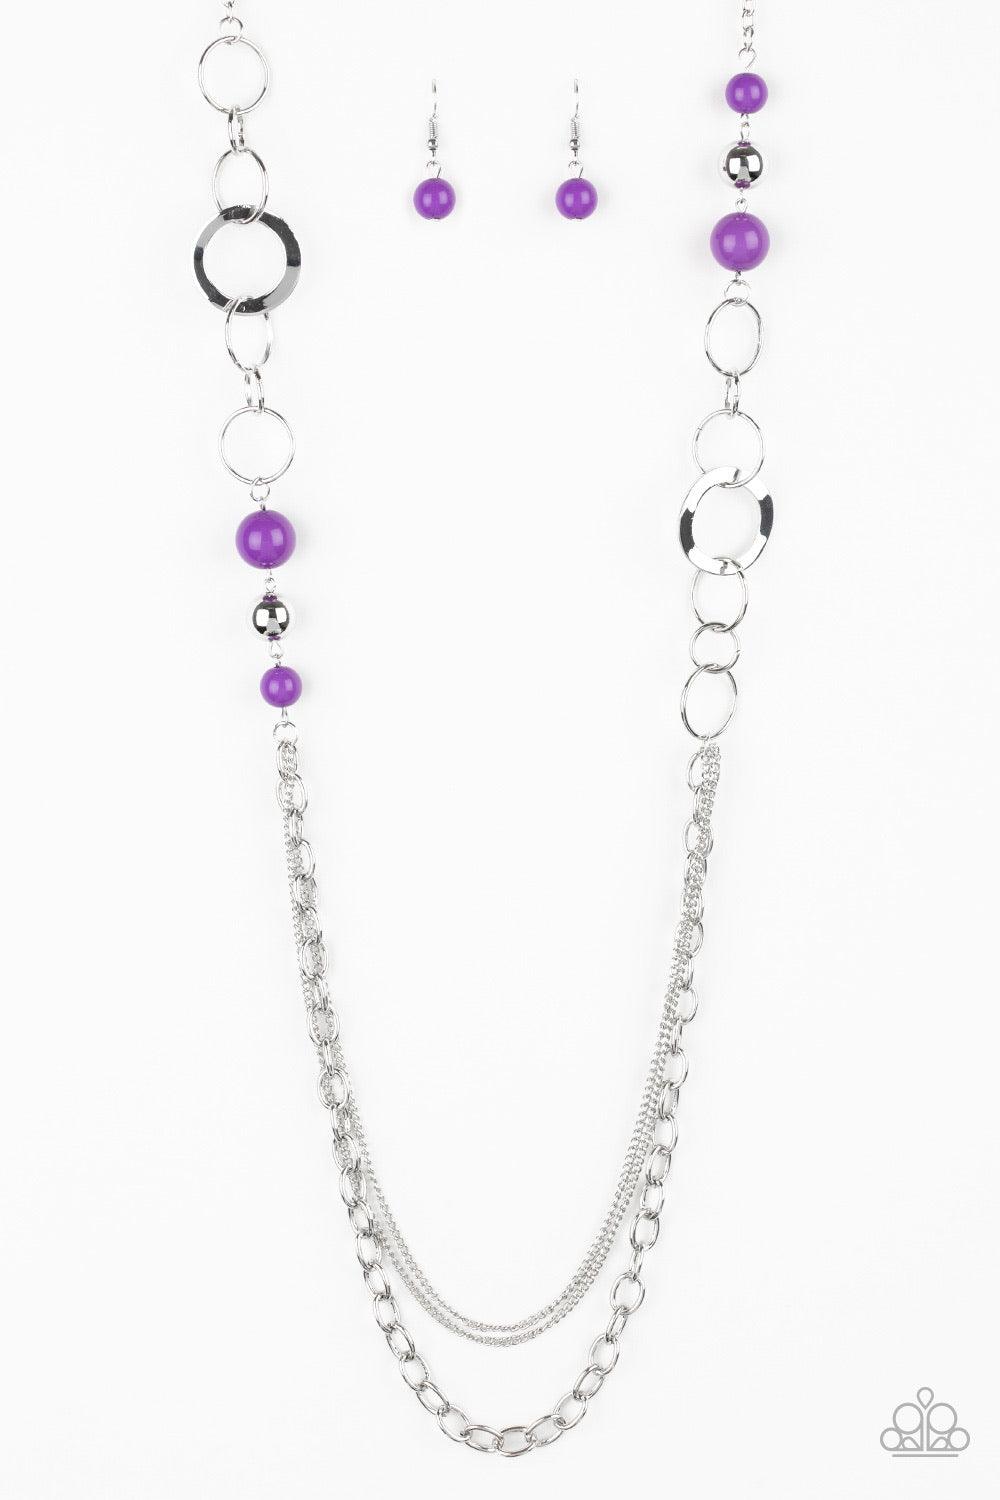 Paparazzi Accessories Modern Motley - Purple Vivacious purple beads, shiny silver beads, and glistening silver hoops give way to layers of mismatched silver chains for a whimsical look. Features an adjustable clasp closure. Sold as one individual necklace